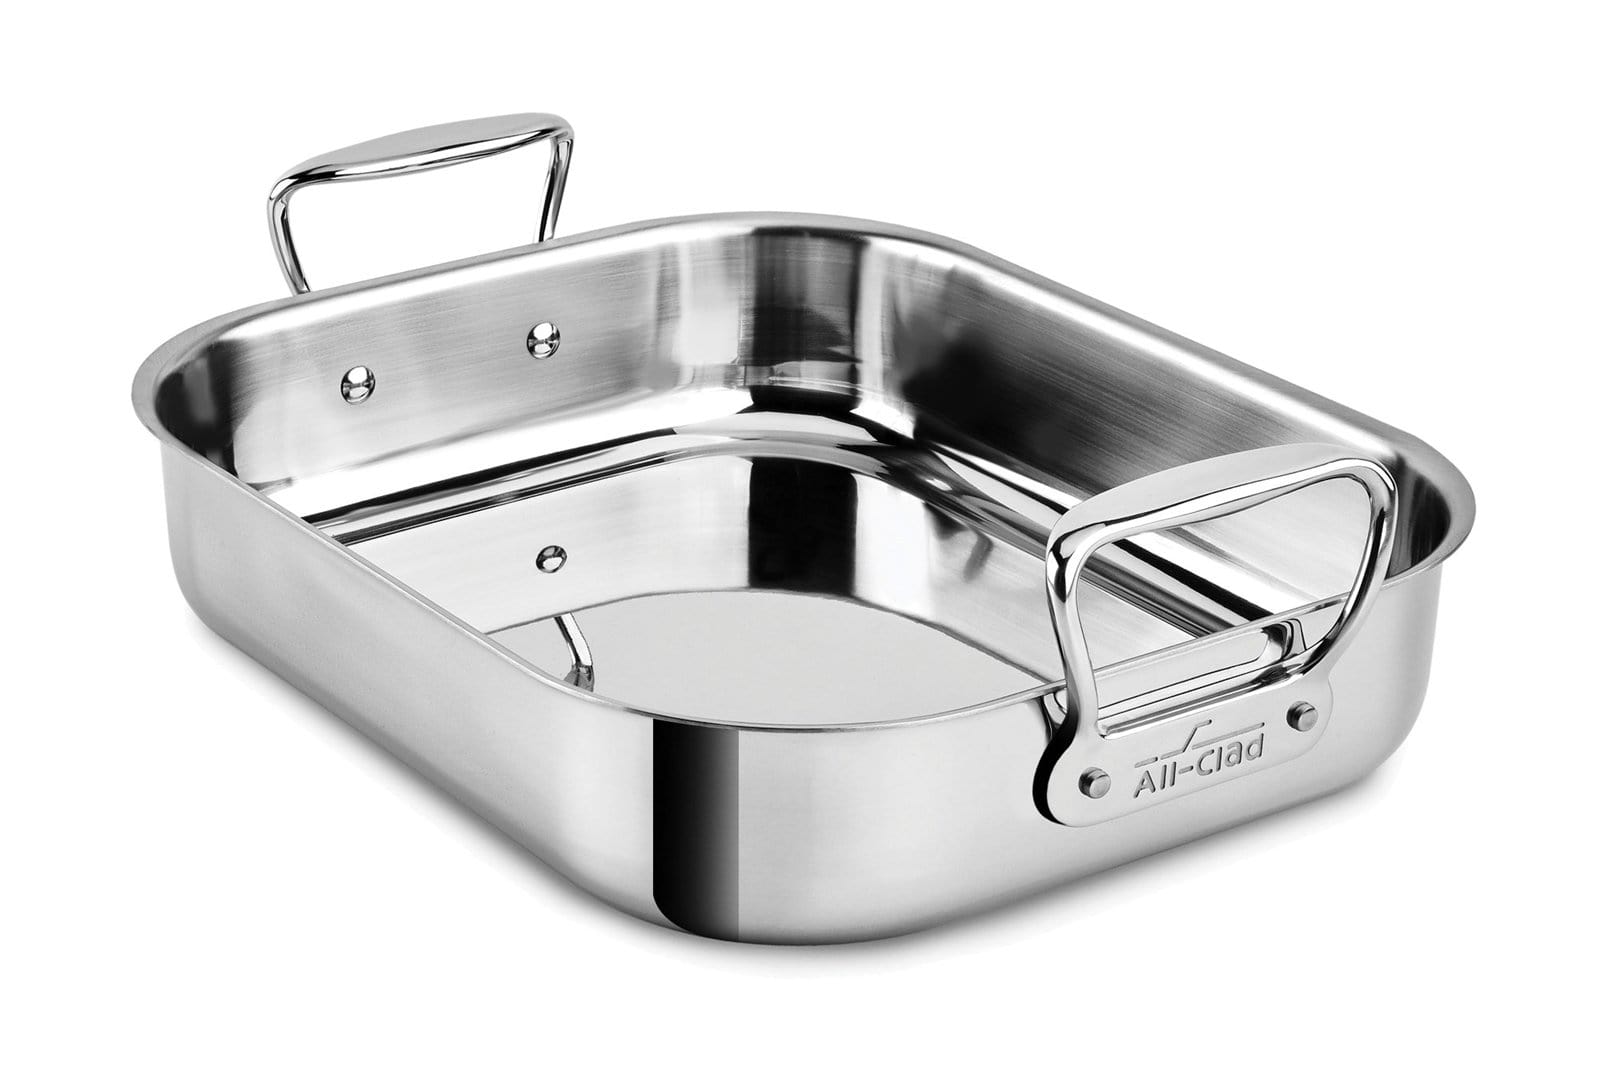 All-Clad Stainless Steel Roasting Pan with Rack, S